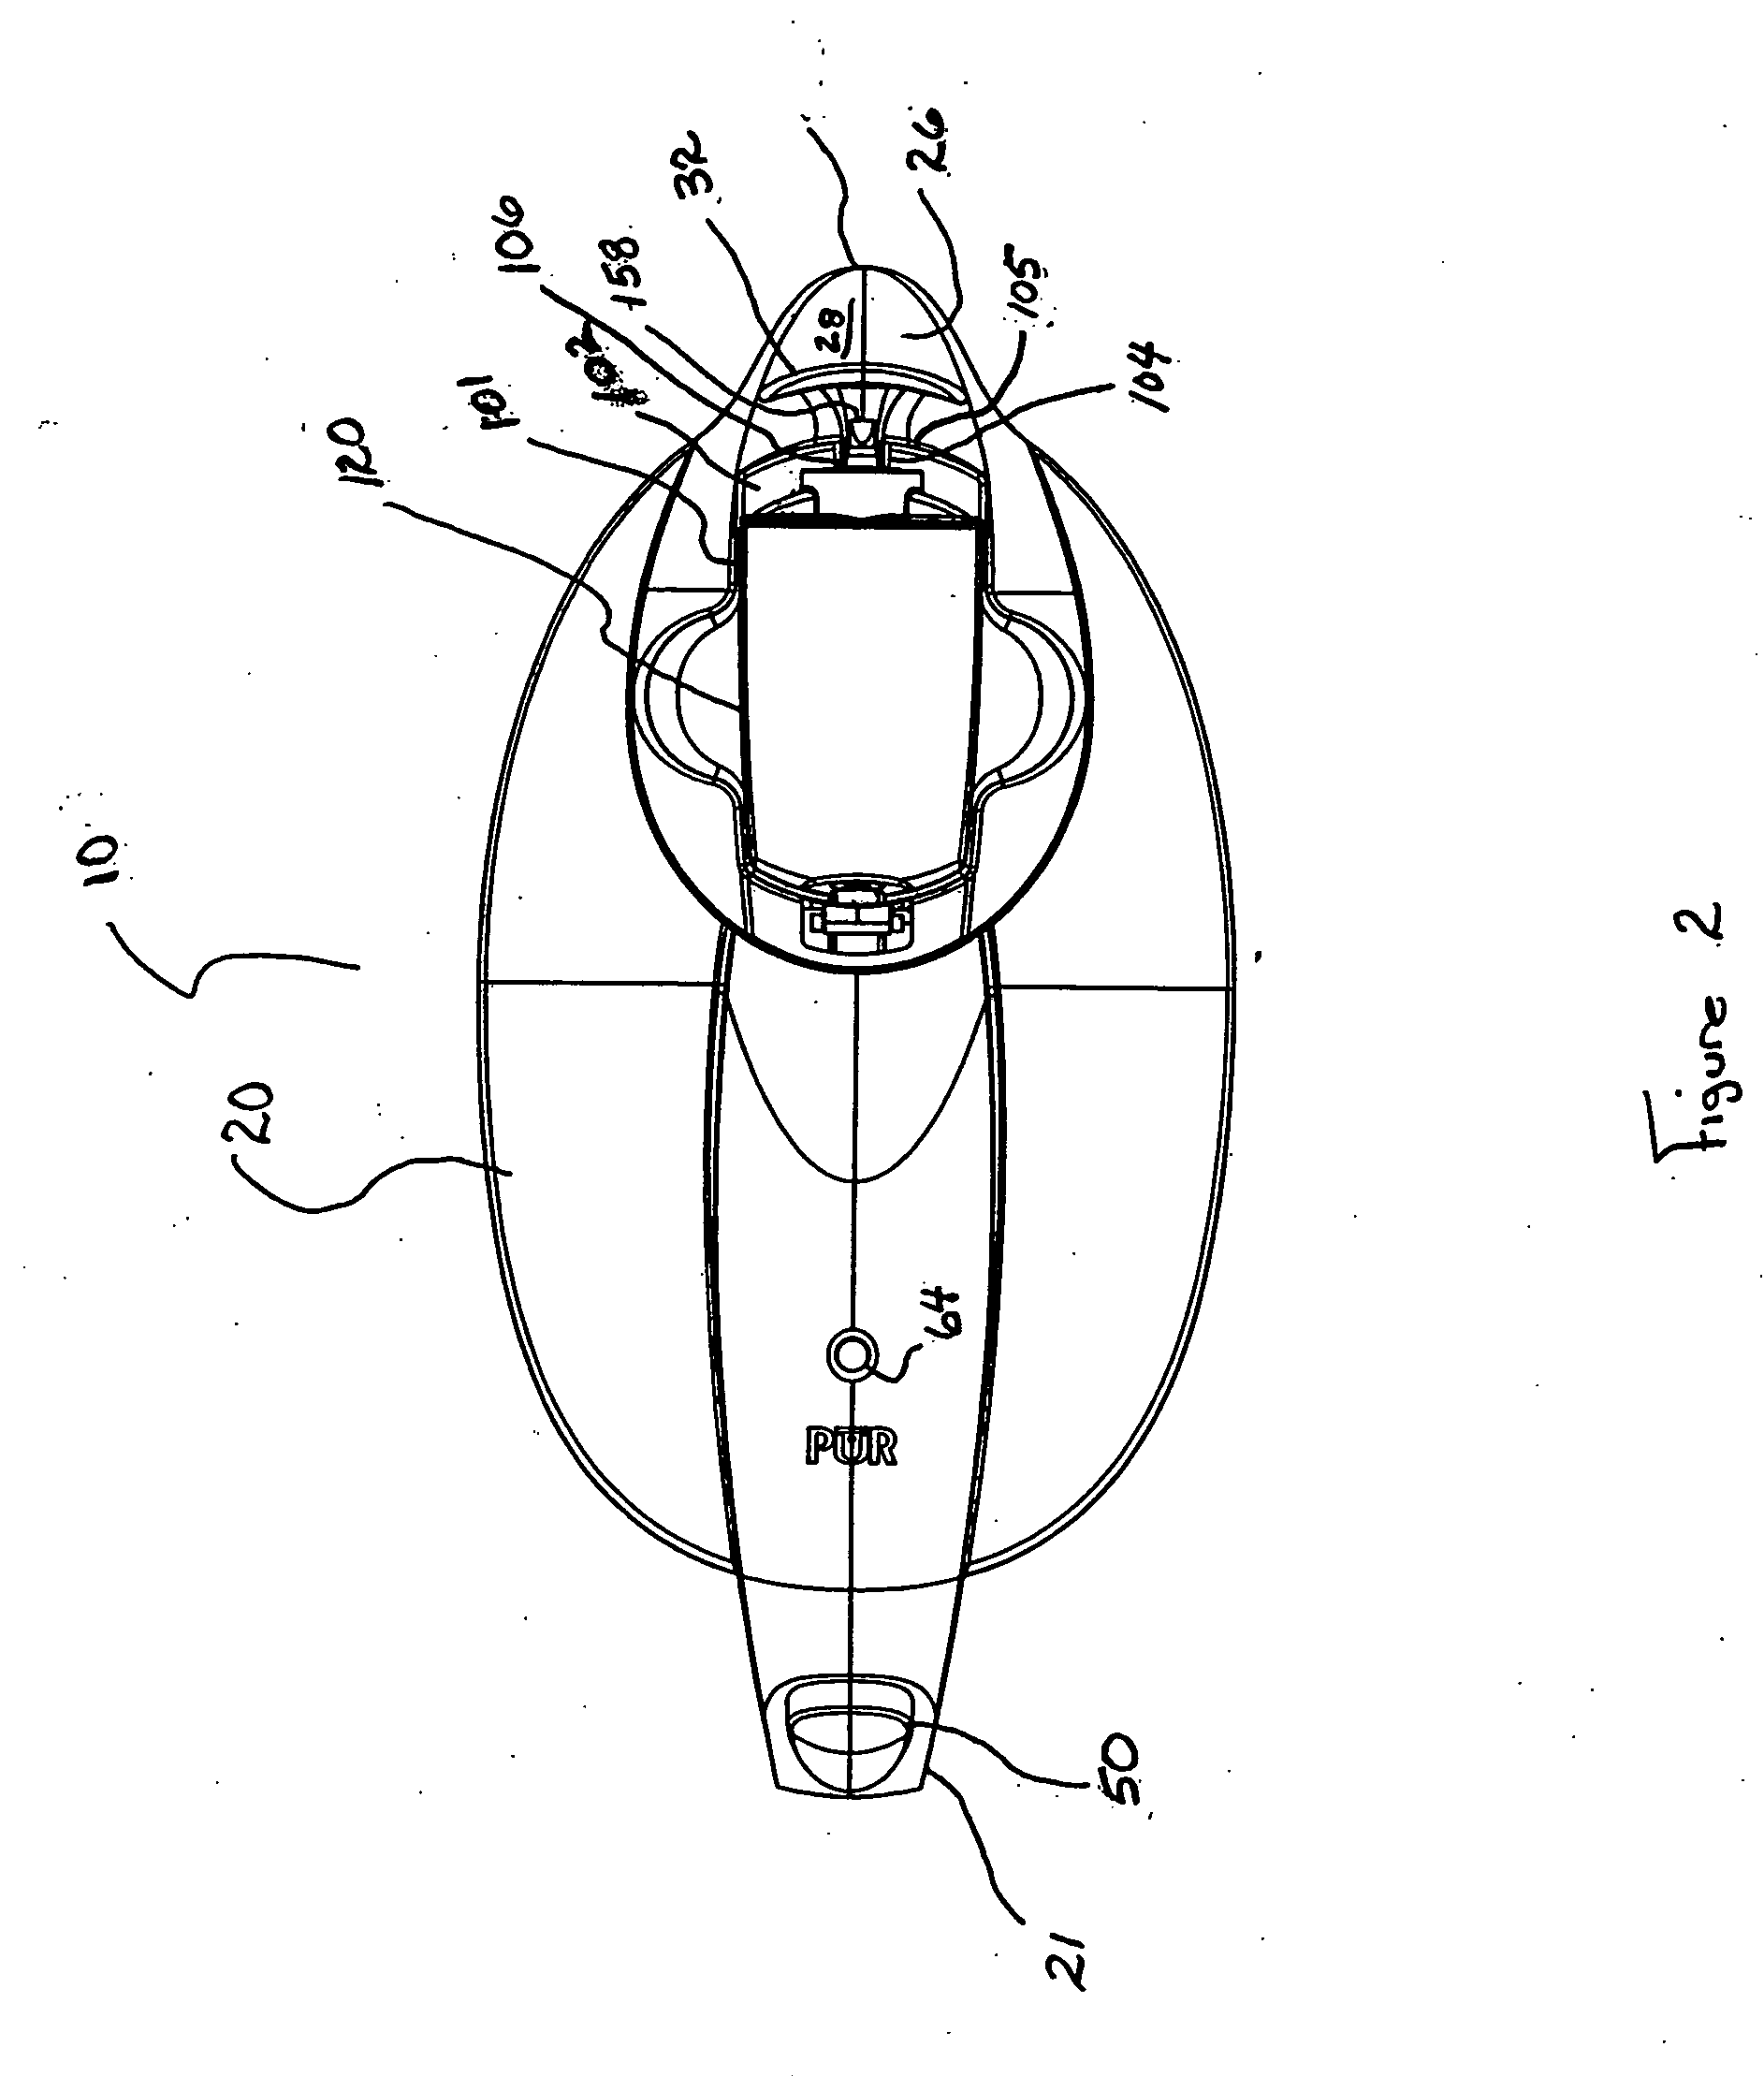 Fluid container having an additive dispensing system